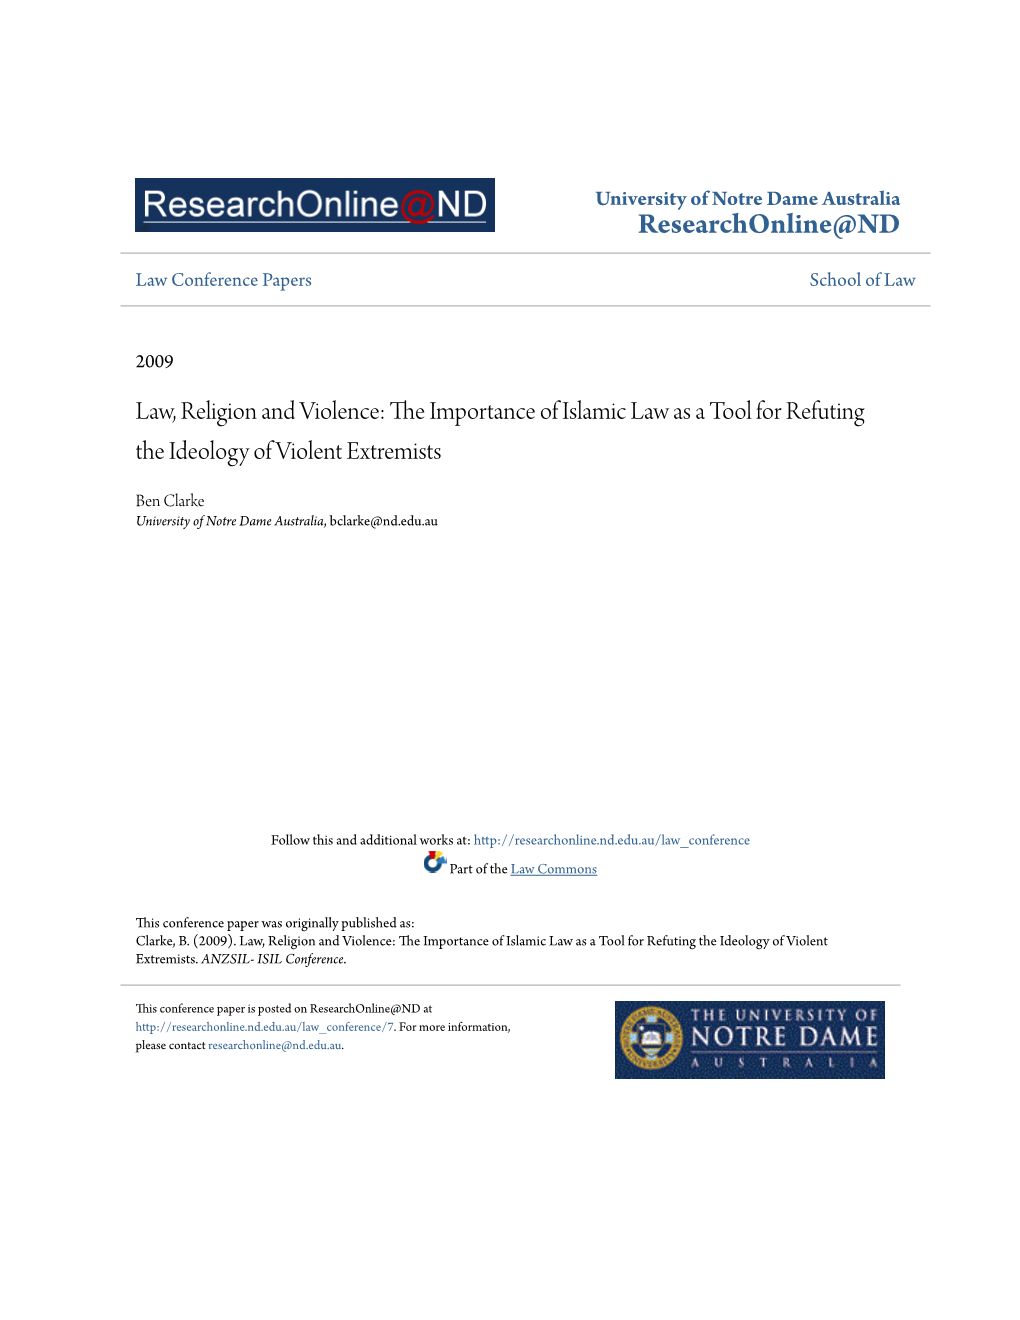 Law, Religion and Violence: the Importance of Islamic Law As a Tool for Refuting the Ideology of Violent Extremists